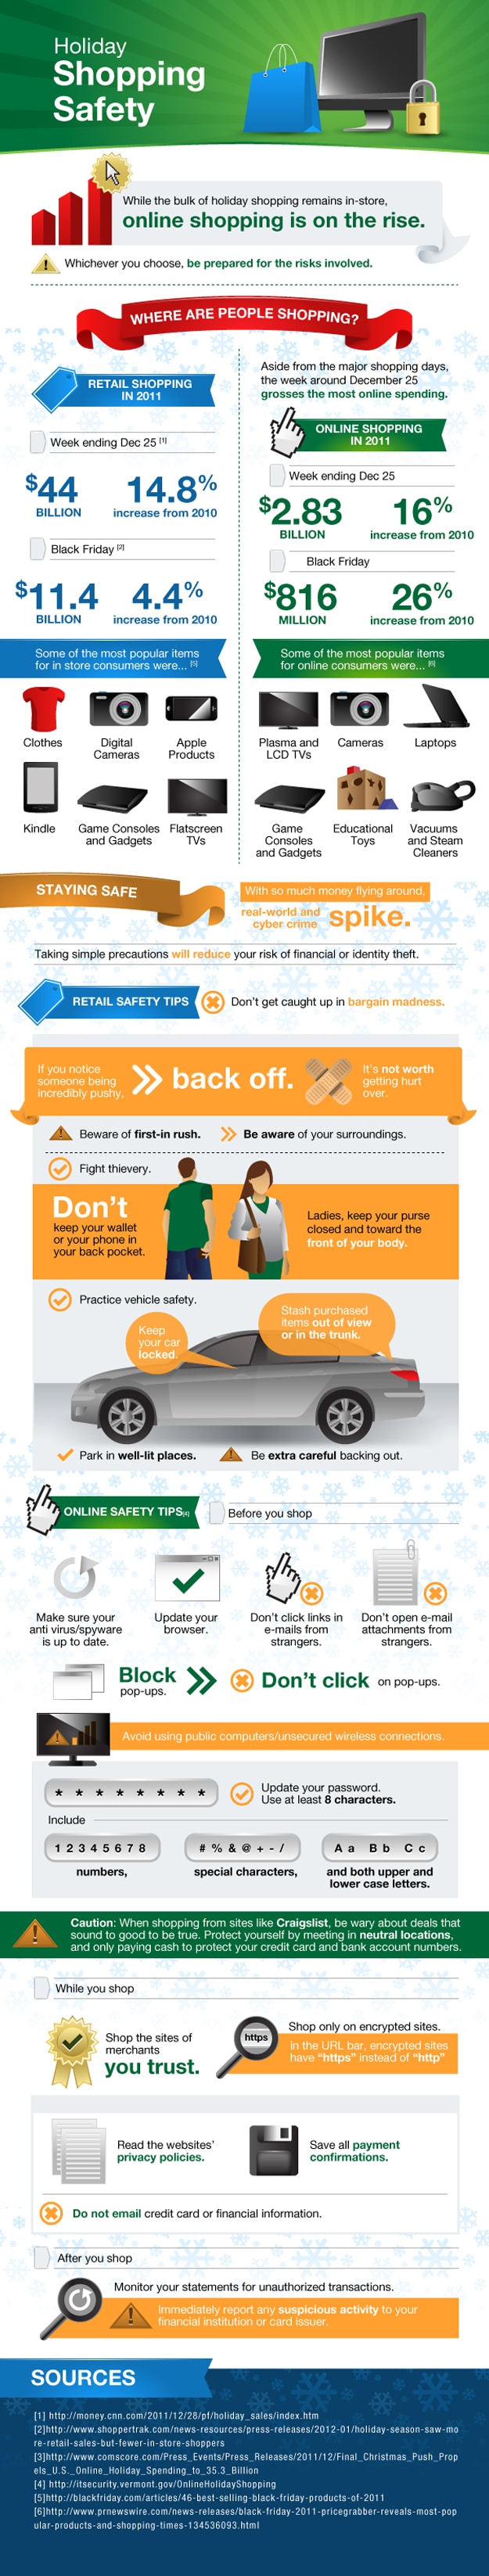 Shop Safely & Securely This Holiday Season [Infographic]